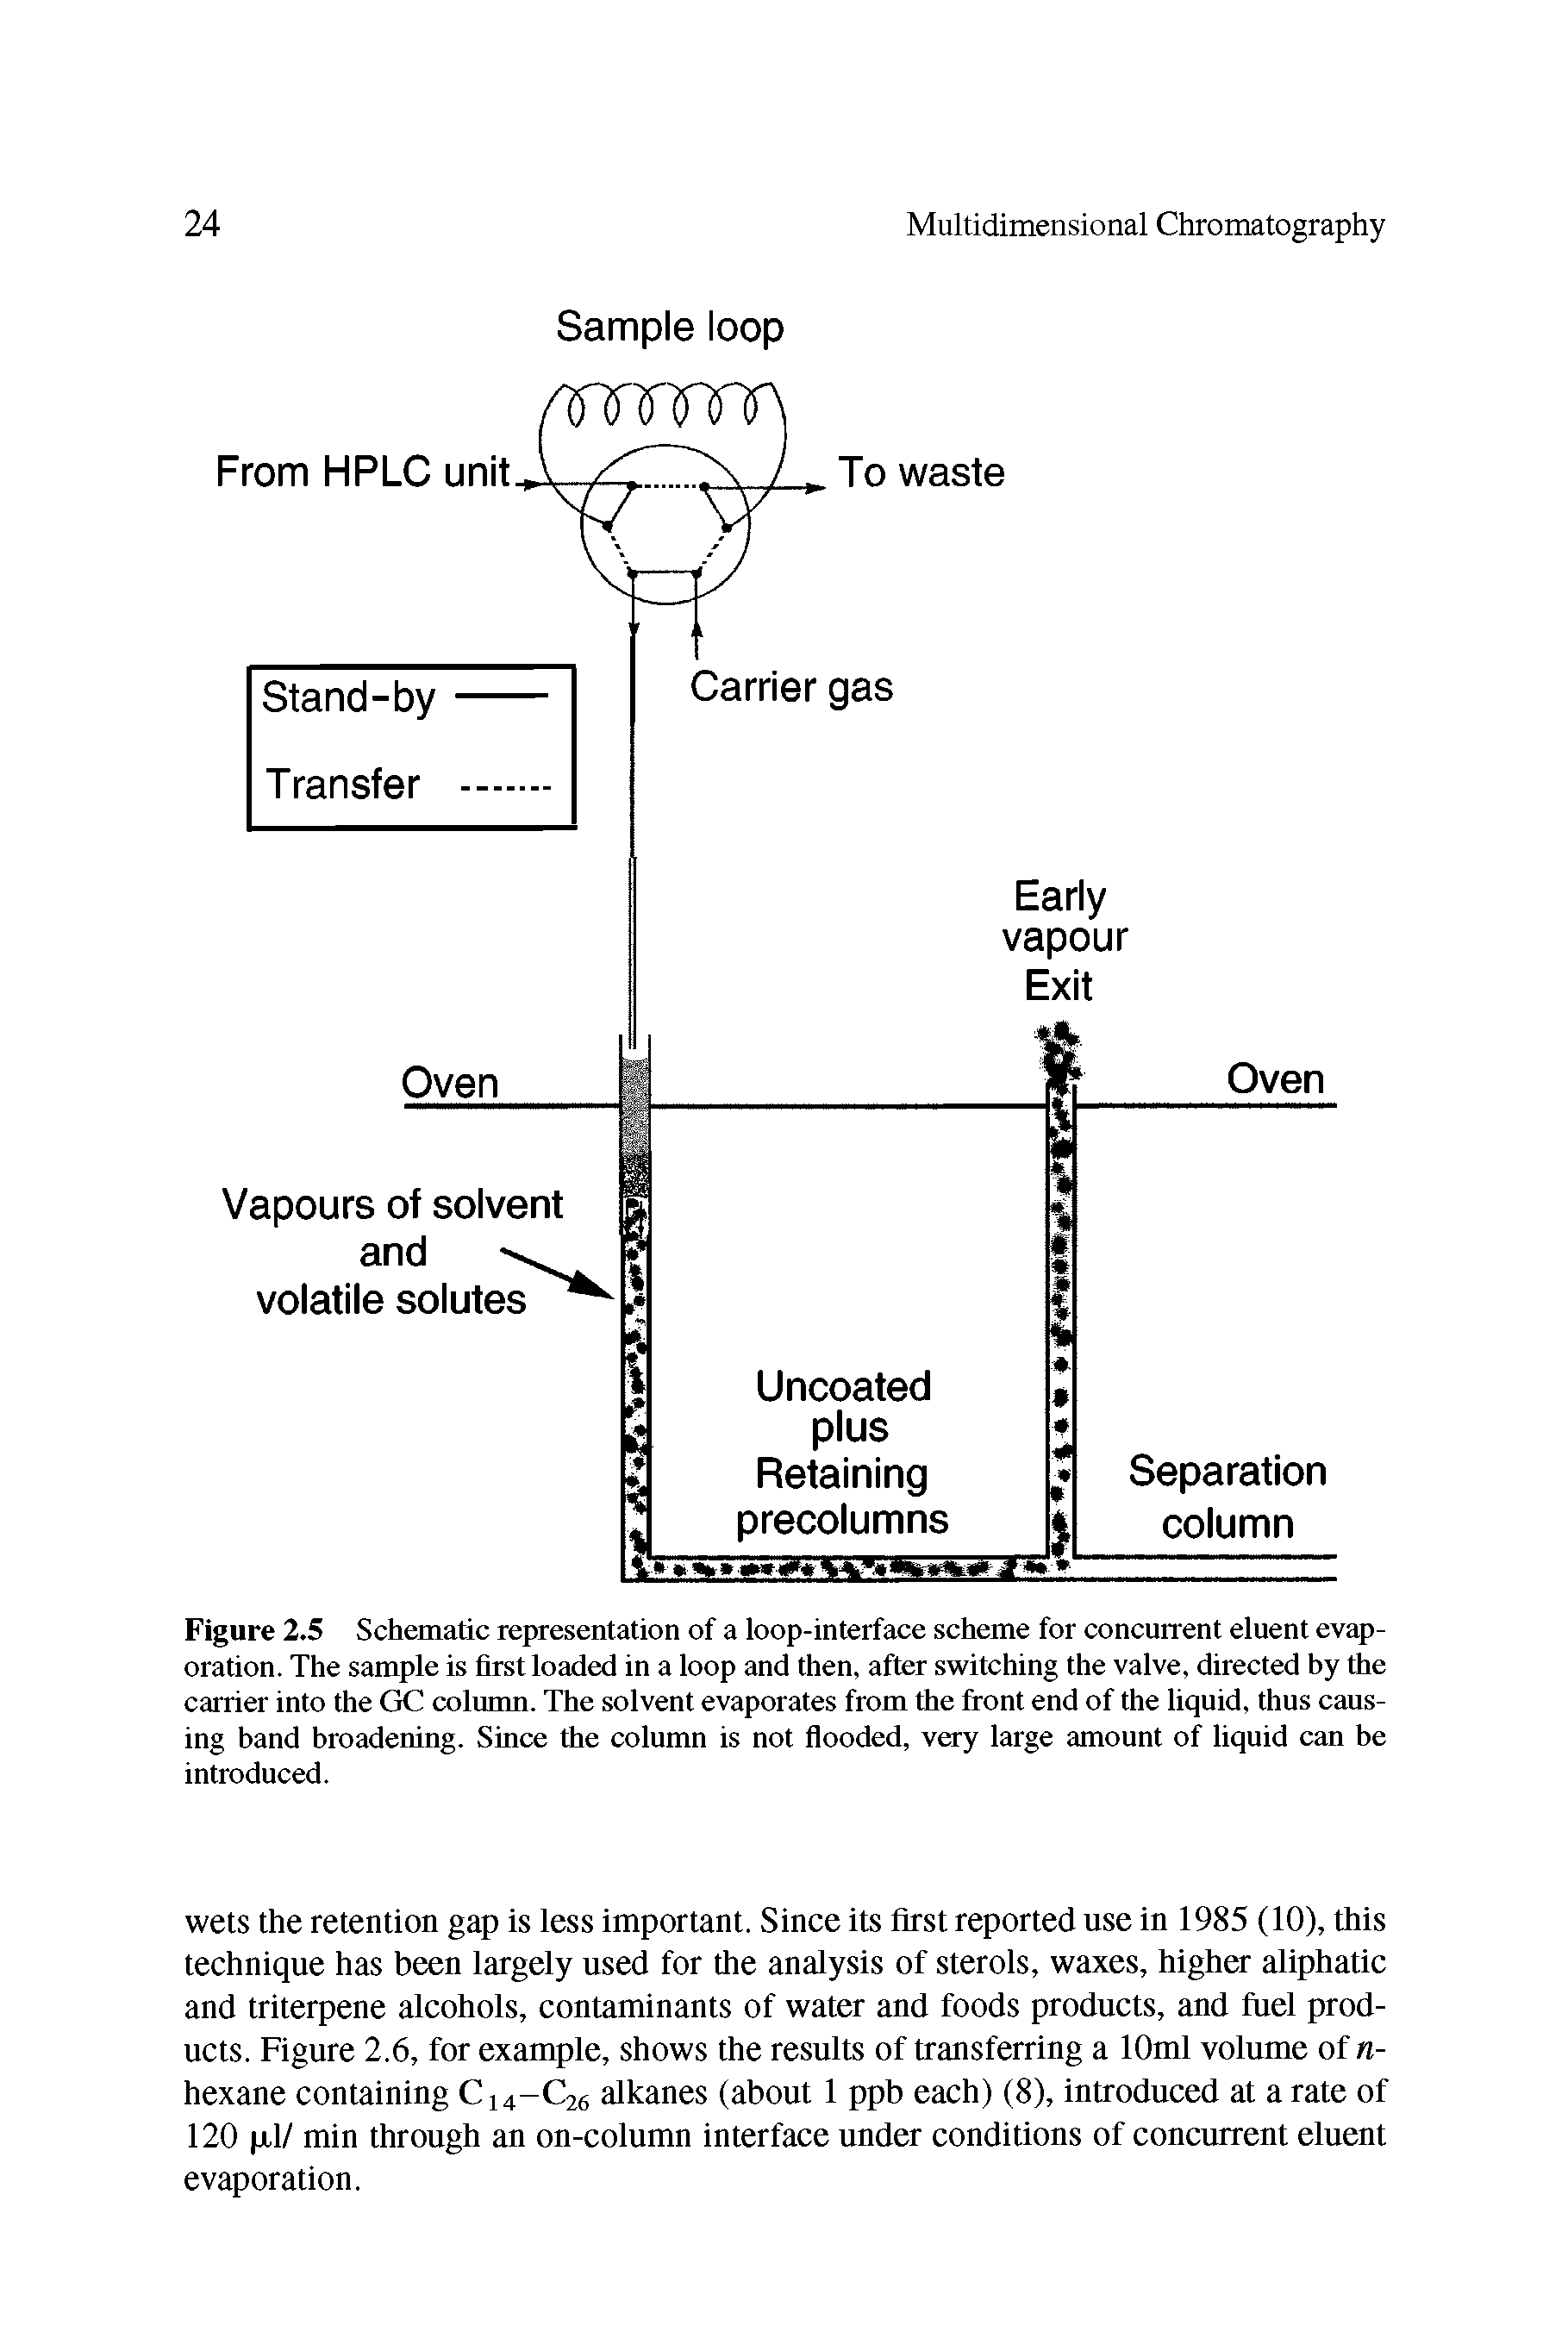 Figure 2.5 Schematic representation of a loop-interface scheme for concurrent eluent evaporation. The sample is first loaded in a loop and then, after switching the valve, directed by the carrier into the GC column. The solvent evaporates from the front end of the liquid, thus causing band broadening. Since the column is not flooded, very large amount of liquid can be introduced.